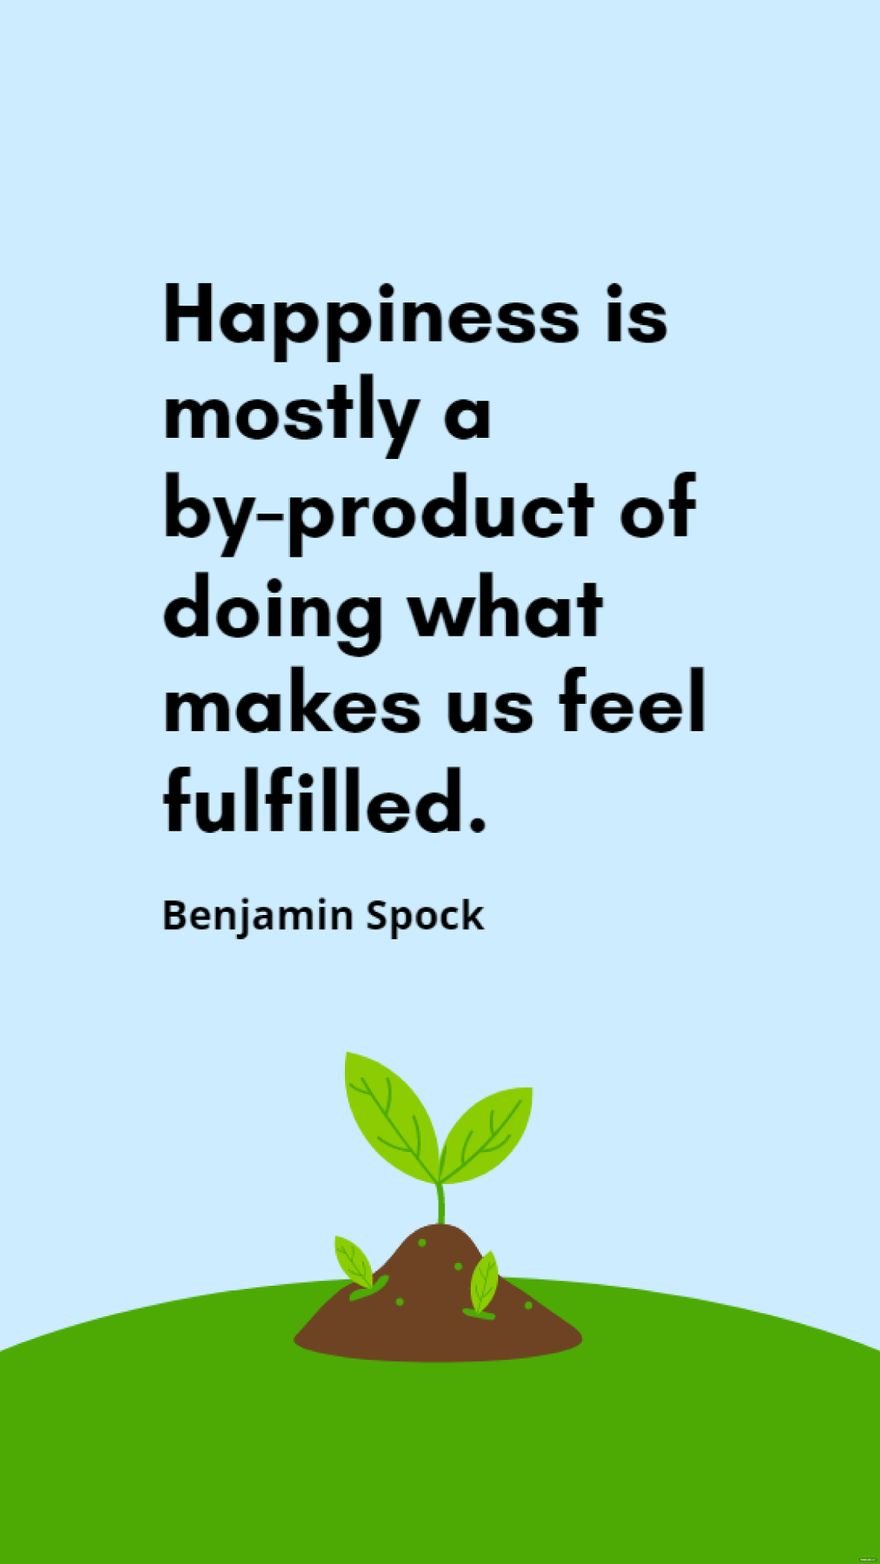 Benjamin Spock - Happiness is mostly a by-product of doing what makes us feel fulfilled.